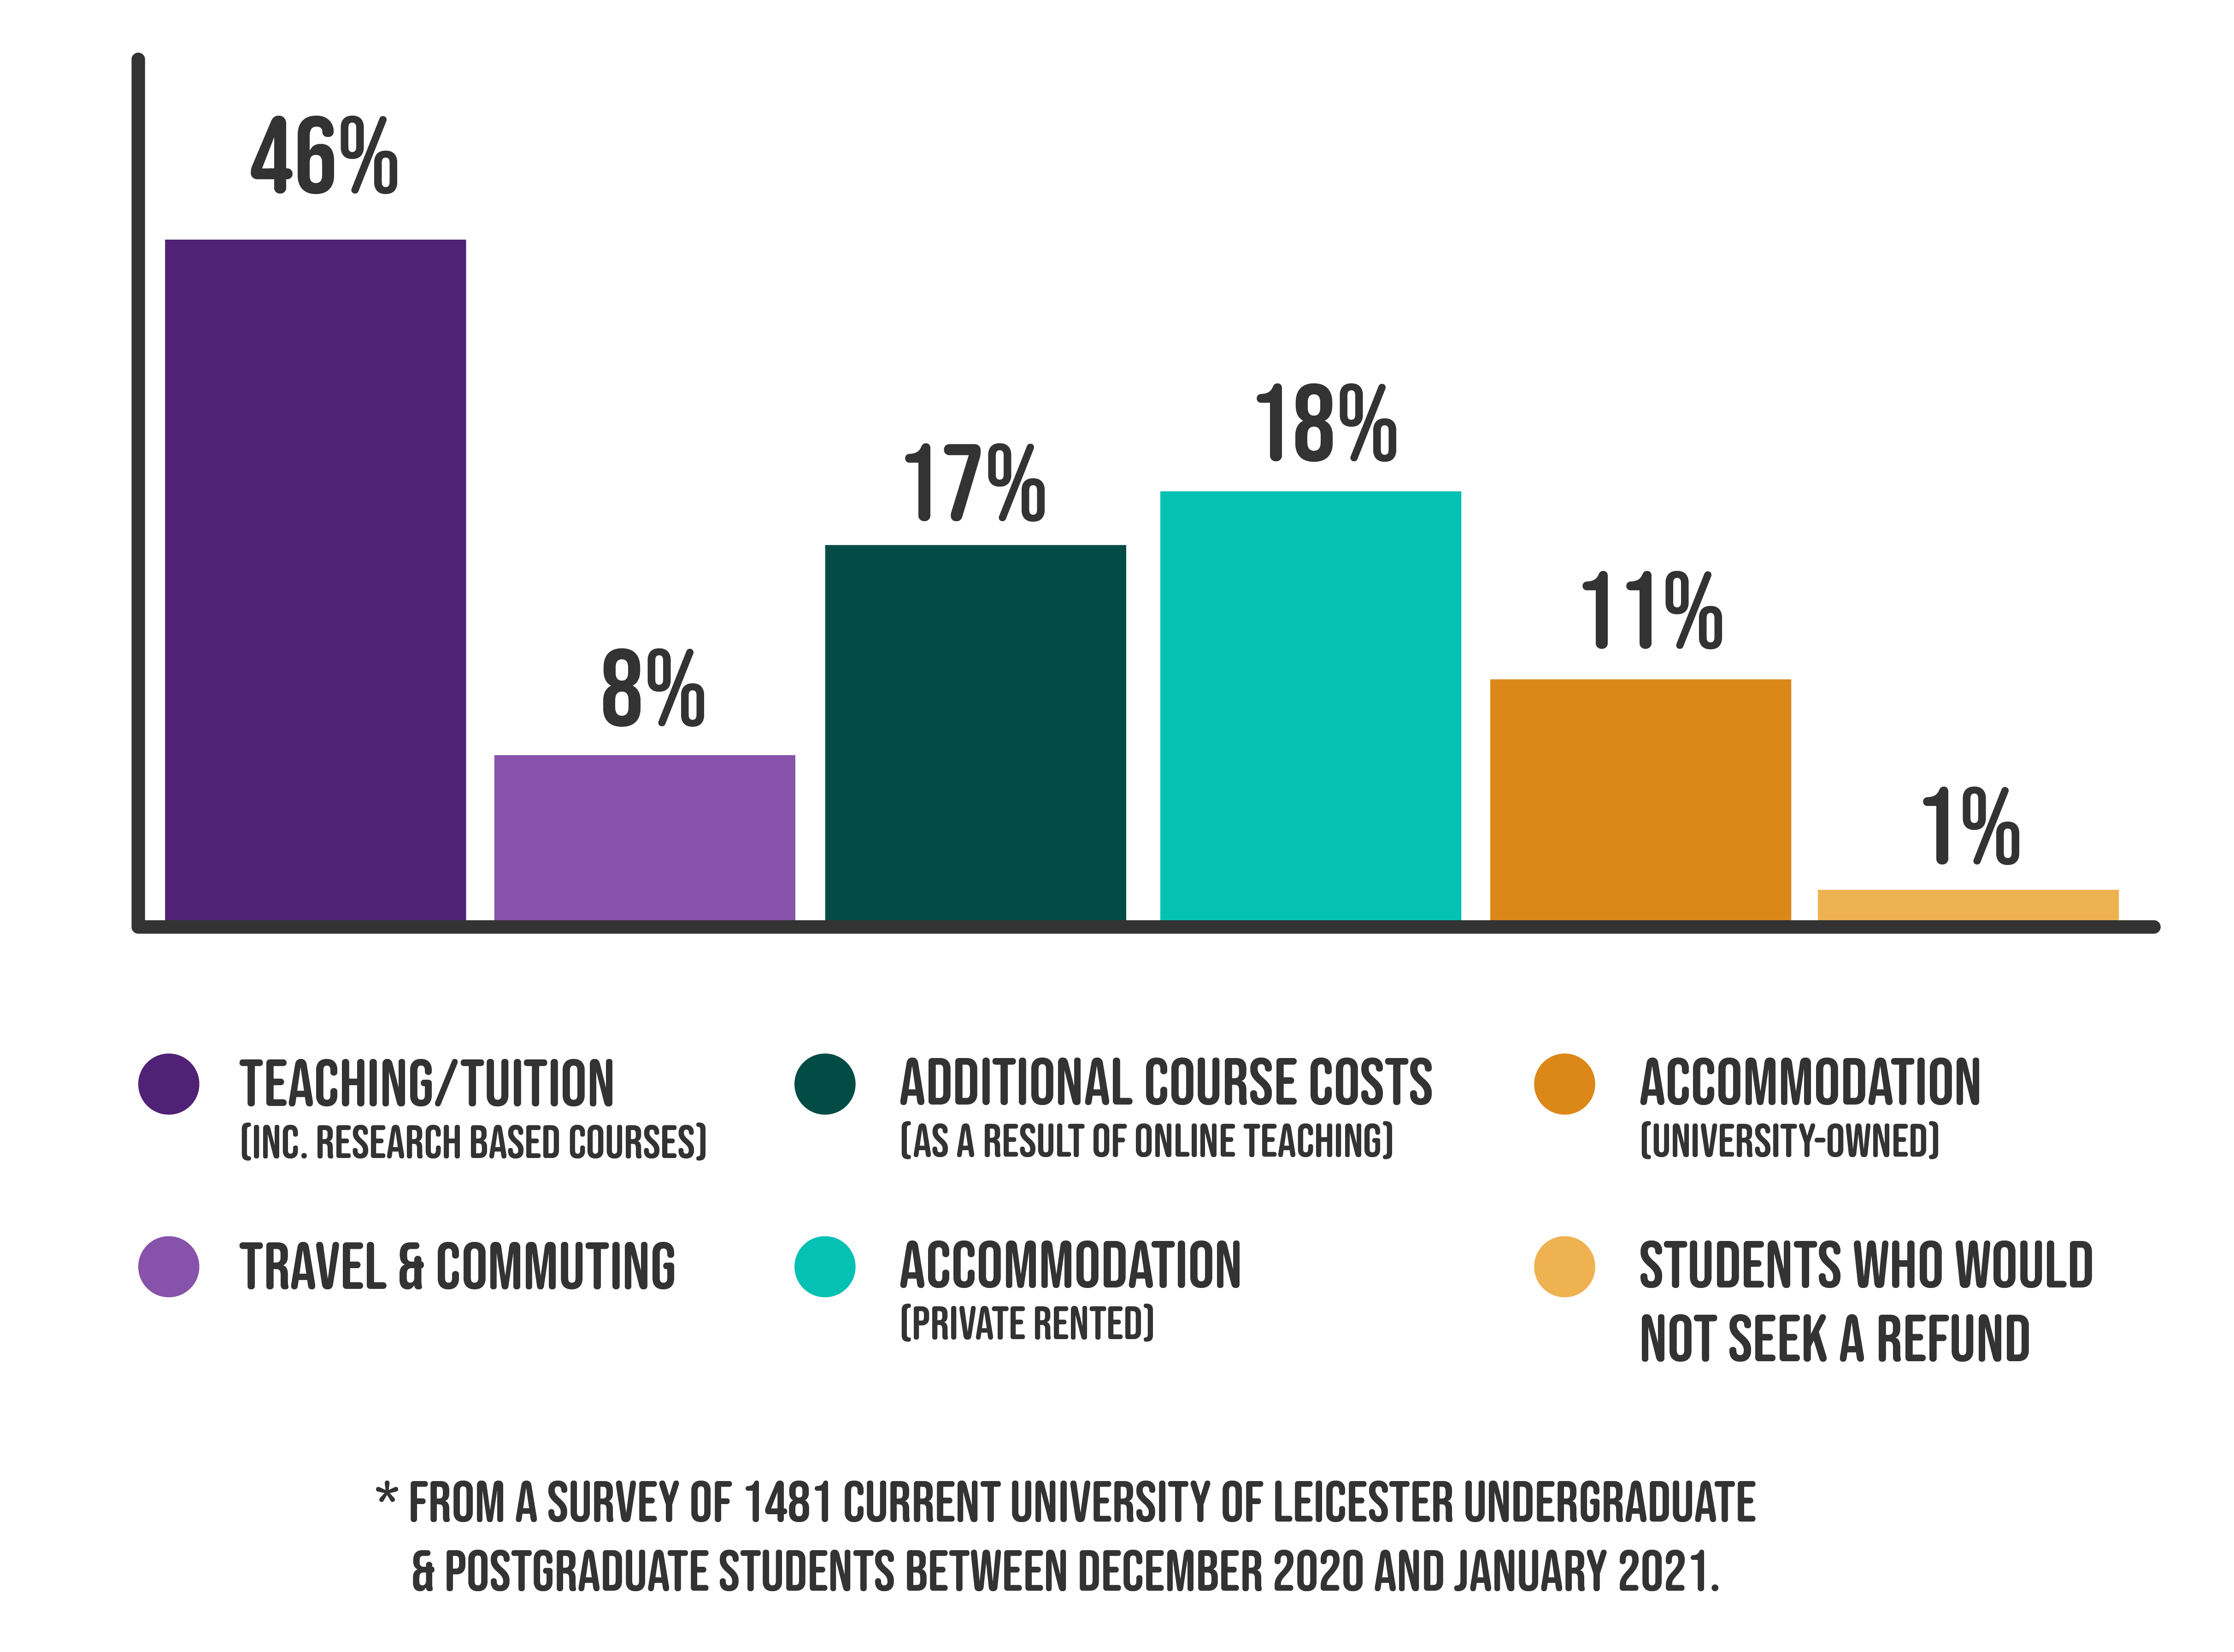 Bar graph of students refund priorities: Teaching tuition 46%, Travel/commuting 8%, Additional course costs because of online teaching 17%, Accommodation (private rented) 18%, Accommodation (University owned) 11%, Students who would not look to seek a refund 1%